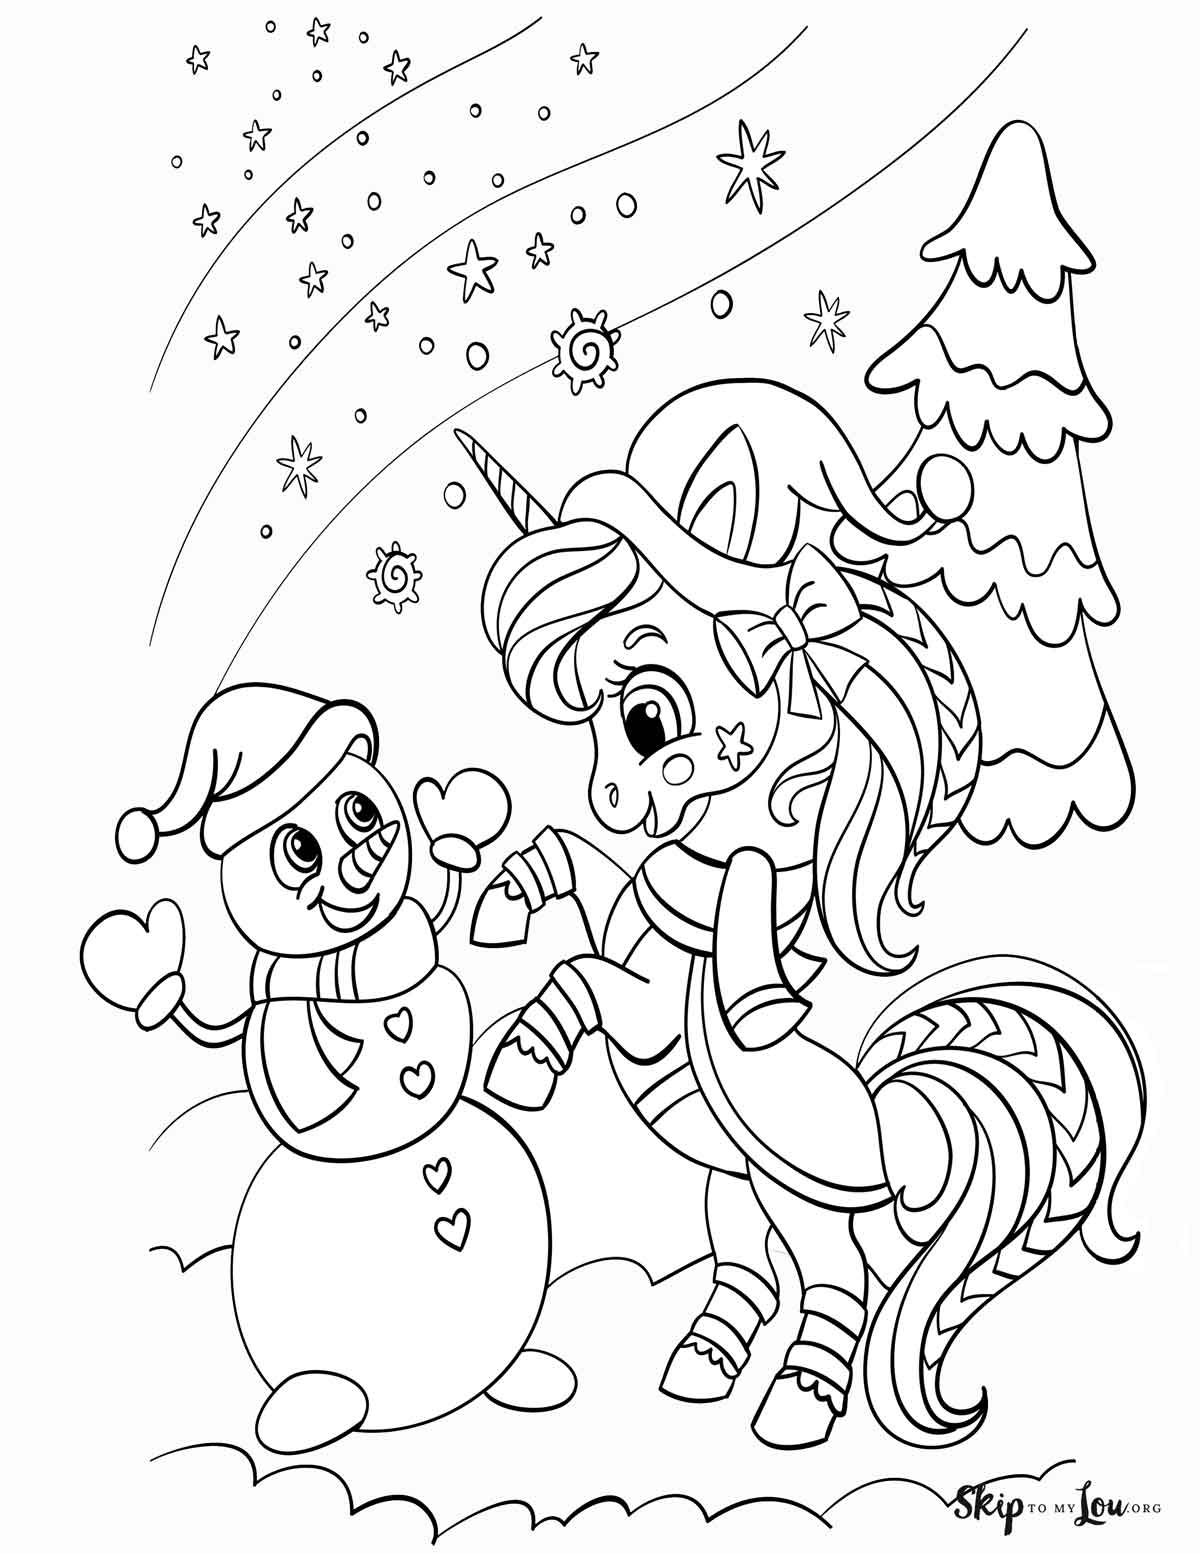 unicorn with snowman coloring page